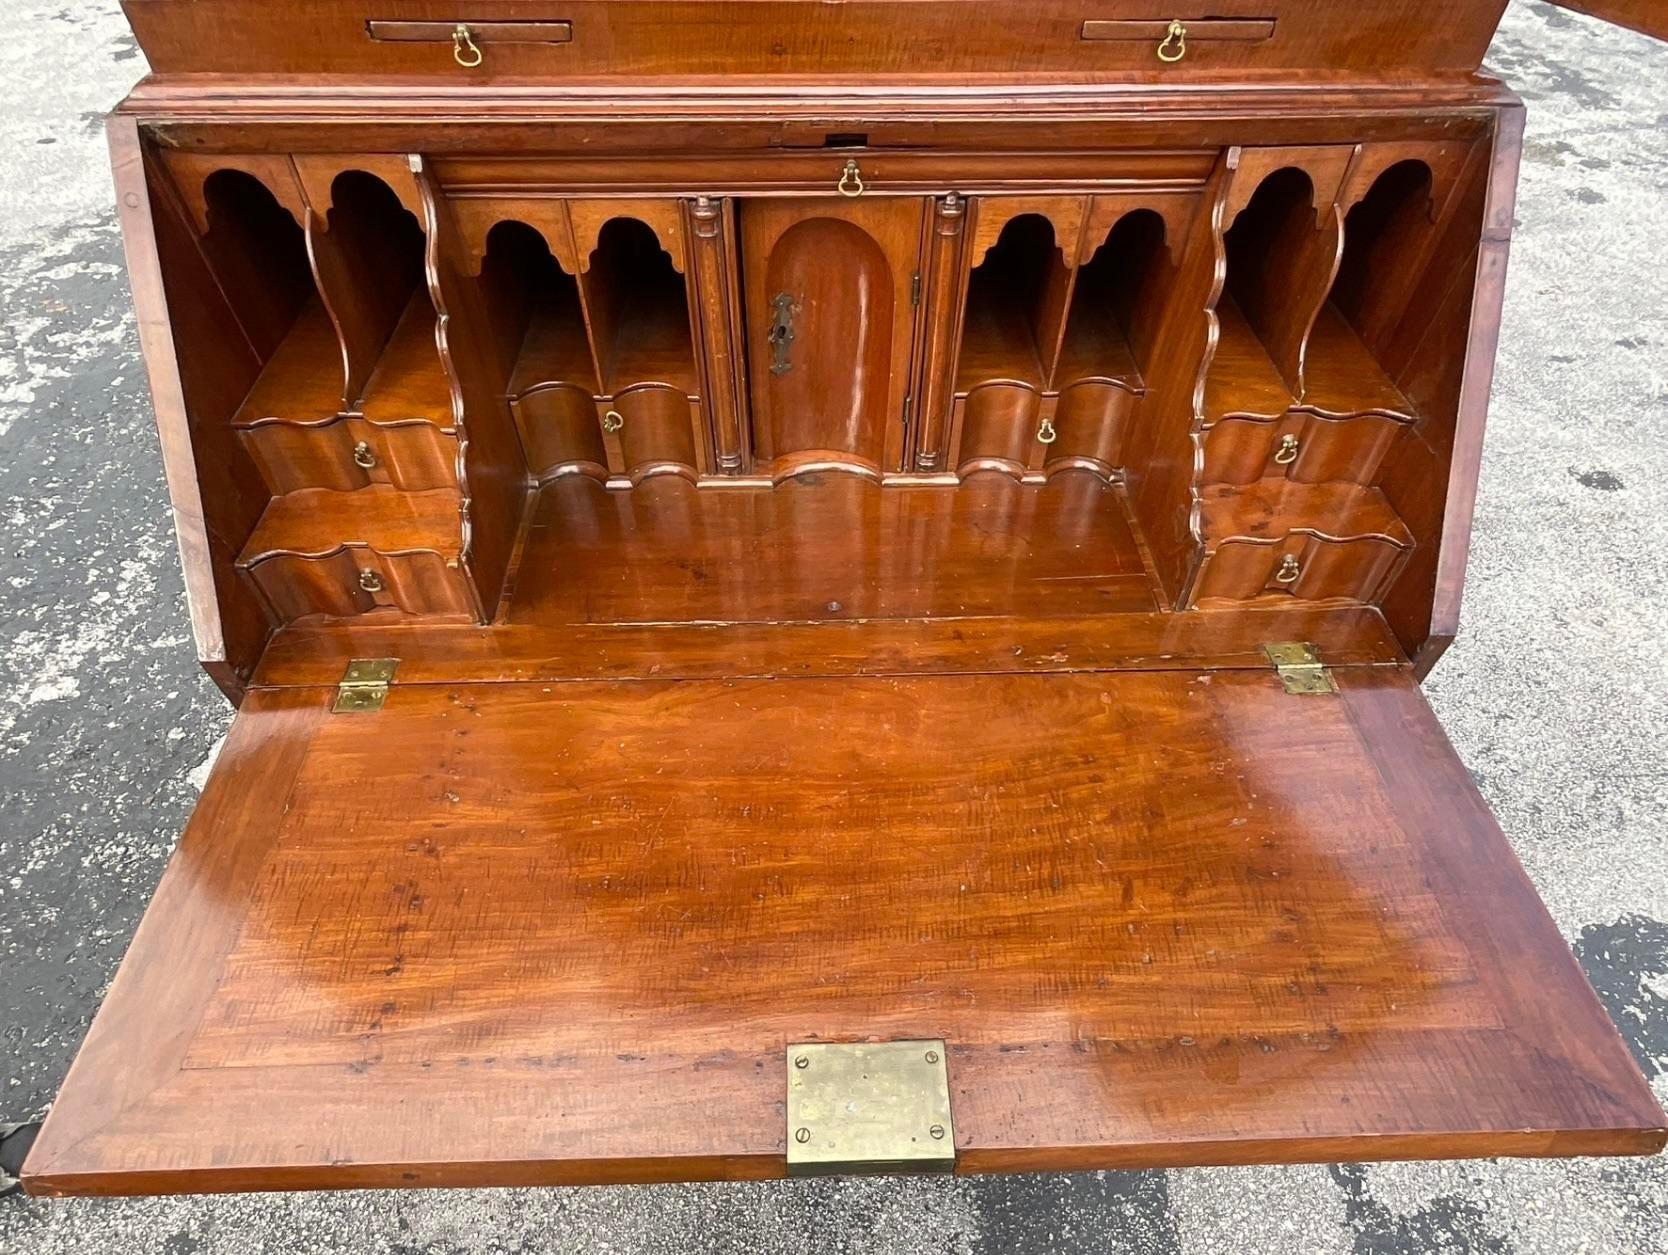 An exceptional vintage Regency desk. A soaring Secretary style with lots of little areas for storage. A beautiful Mahogany case that has a beautiful patina from time. Acquired from a Palm Beach estate.